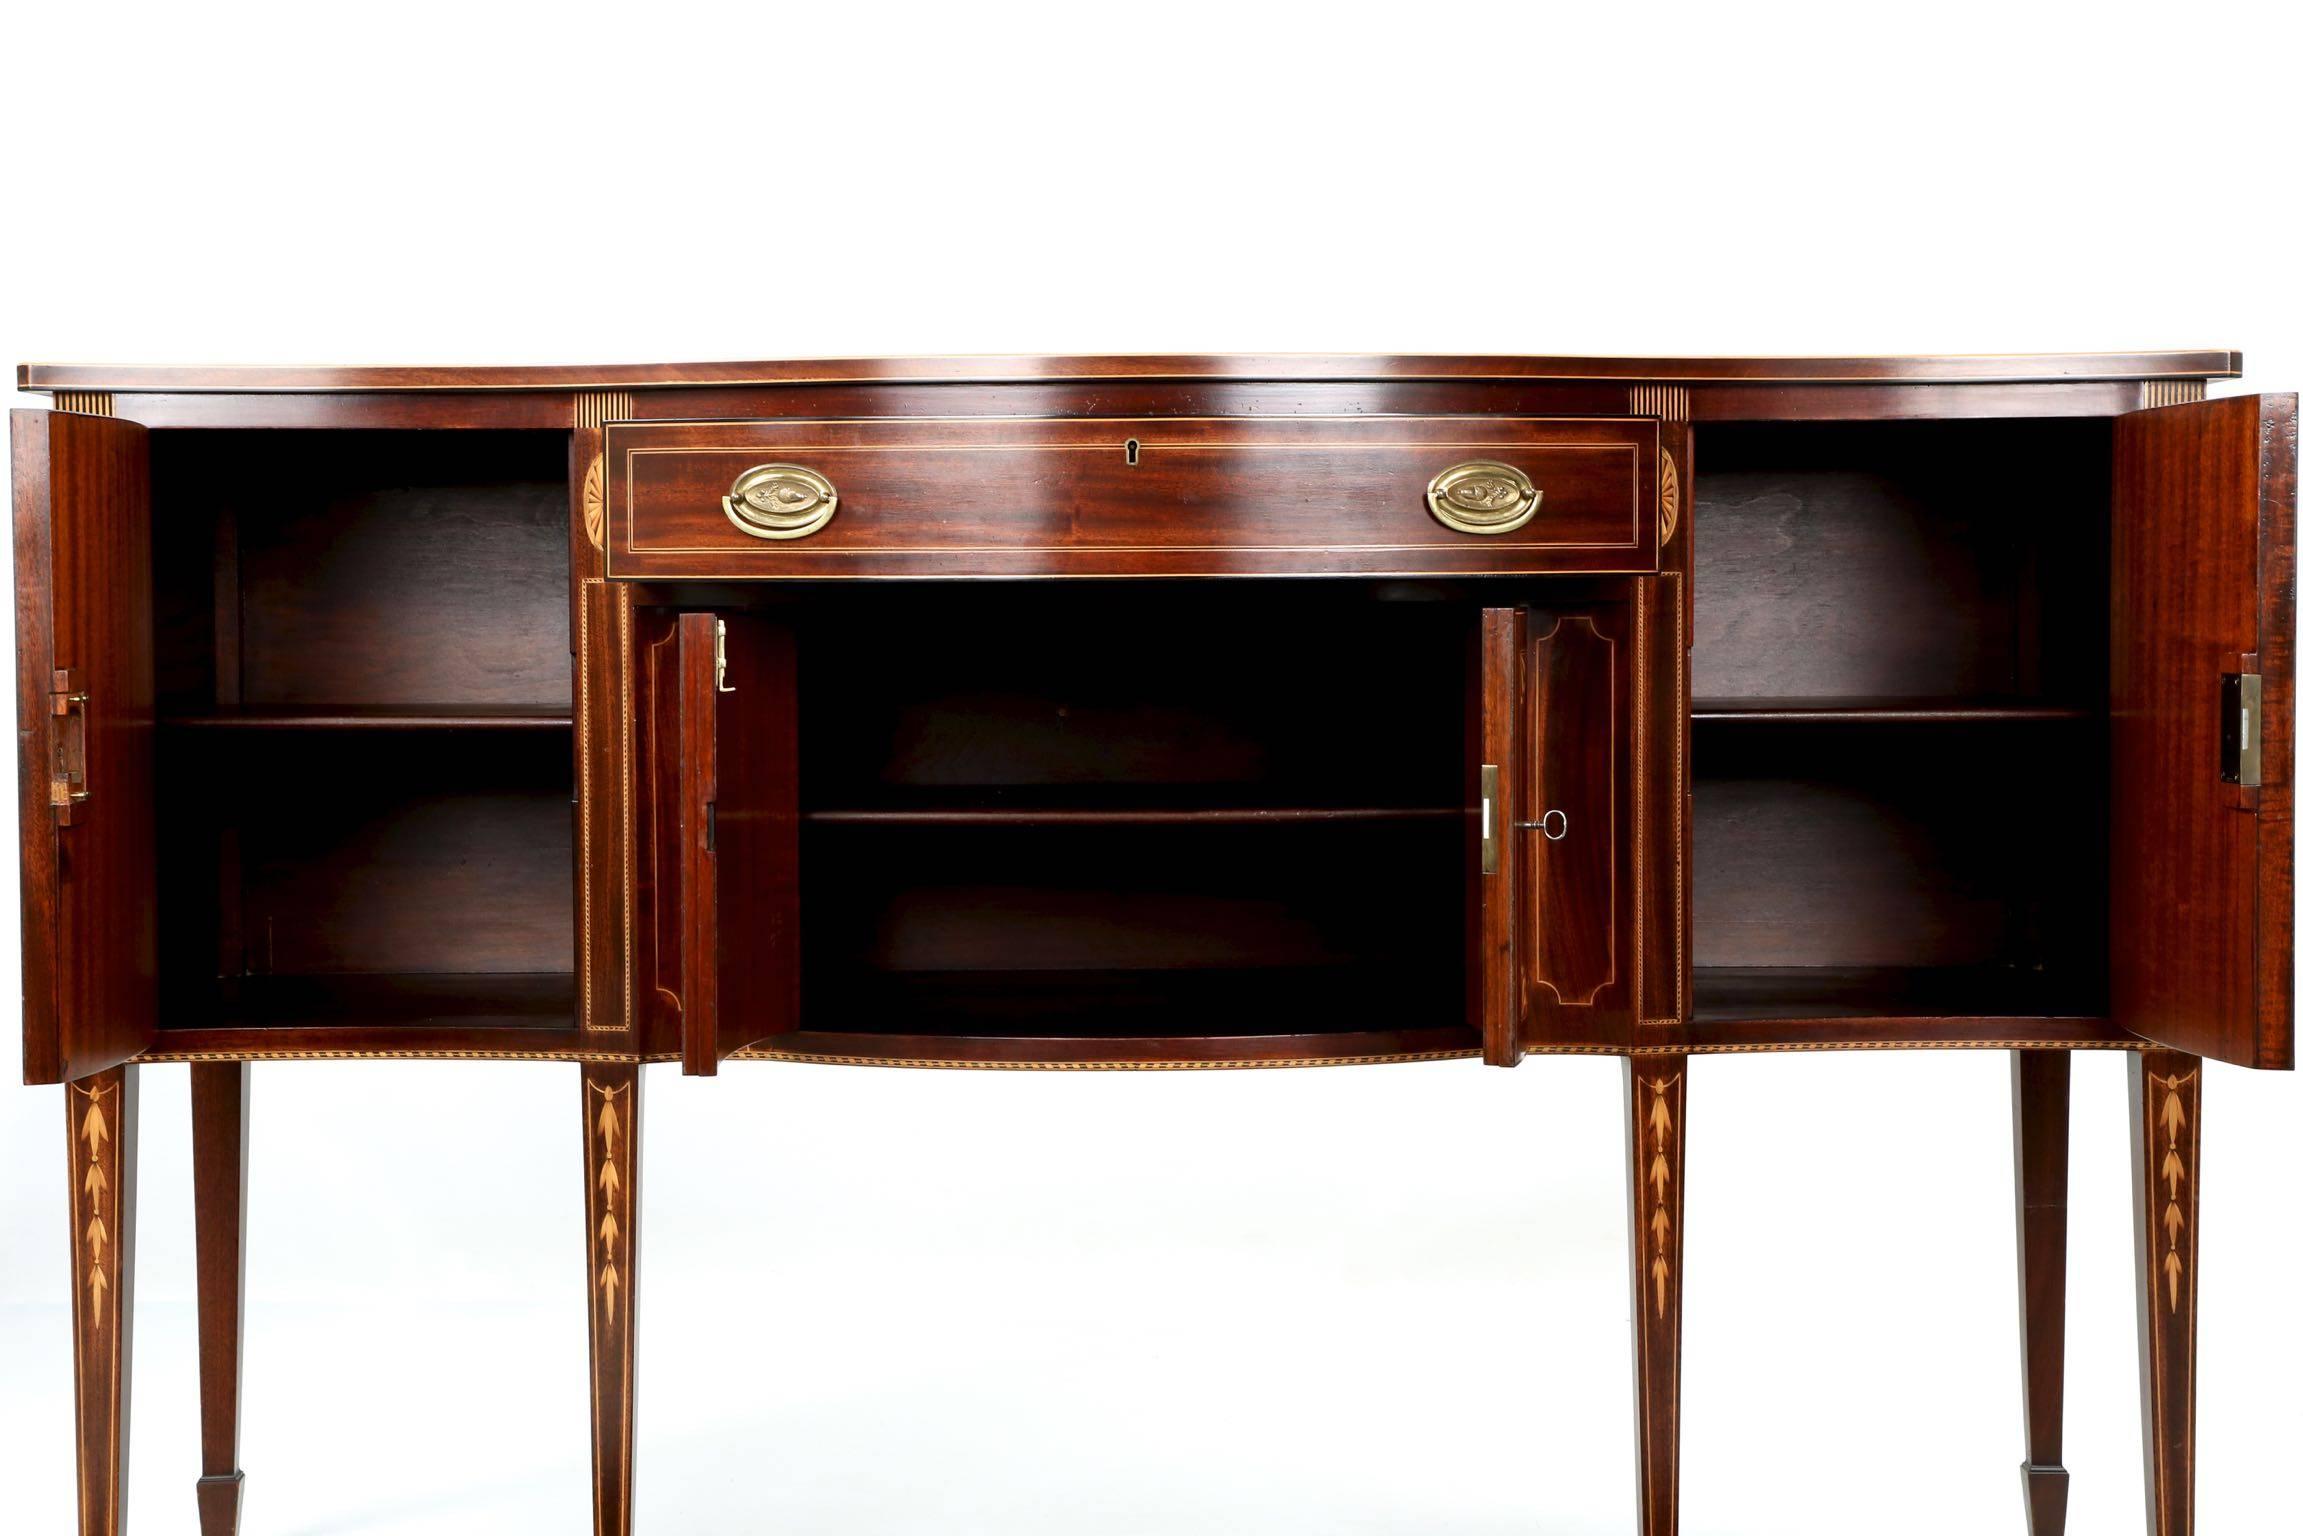 A fine handcrafted reproduction from the one of the most well respected and prolific firms of the first half of the 20th Century, this sideboard is an excellent representation of what they were capable of producing.  The beautiful solid mahogany and